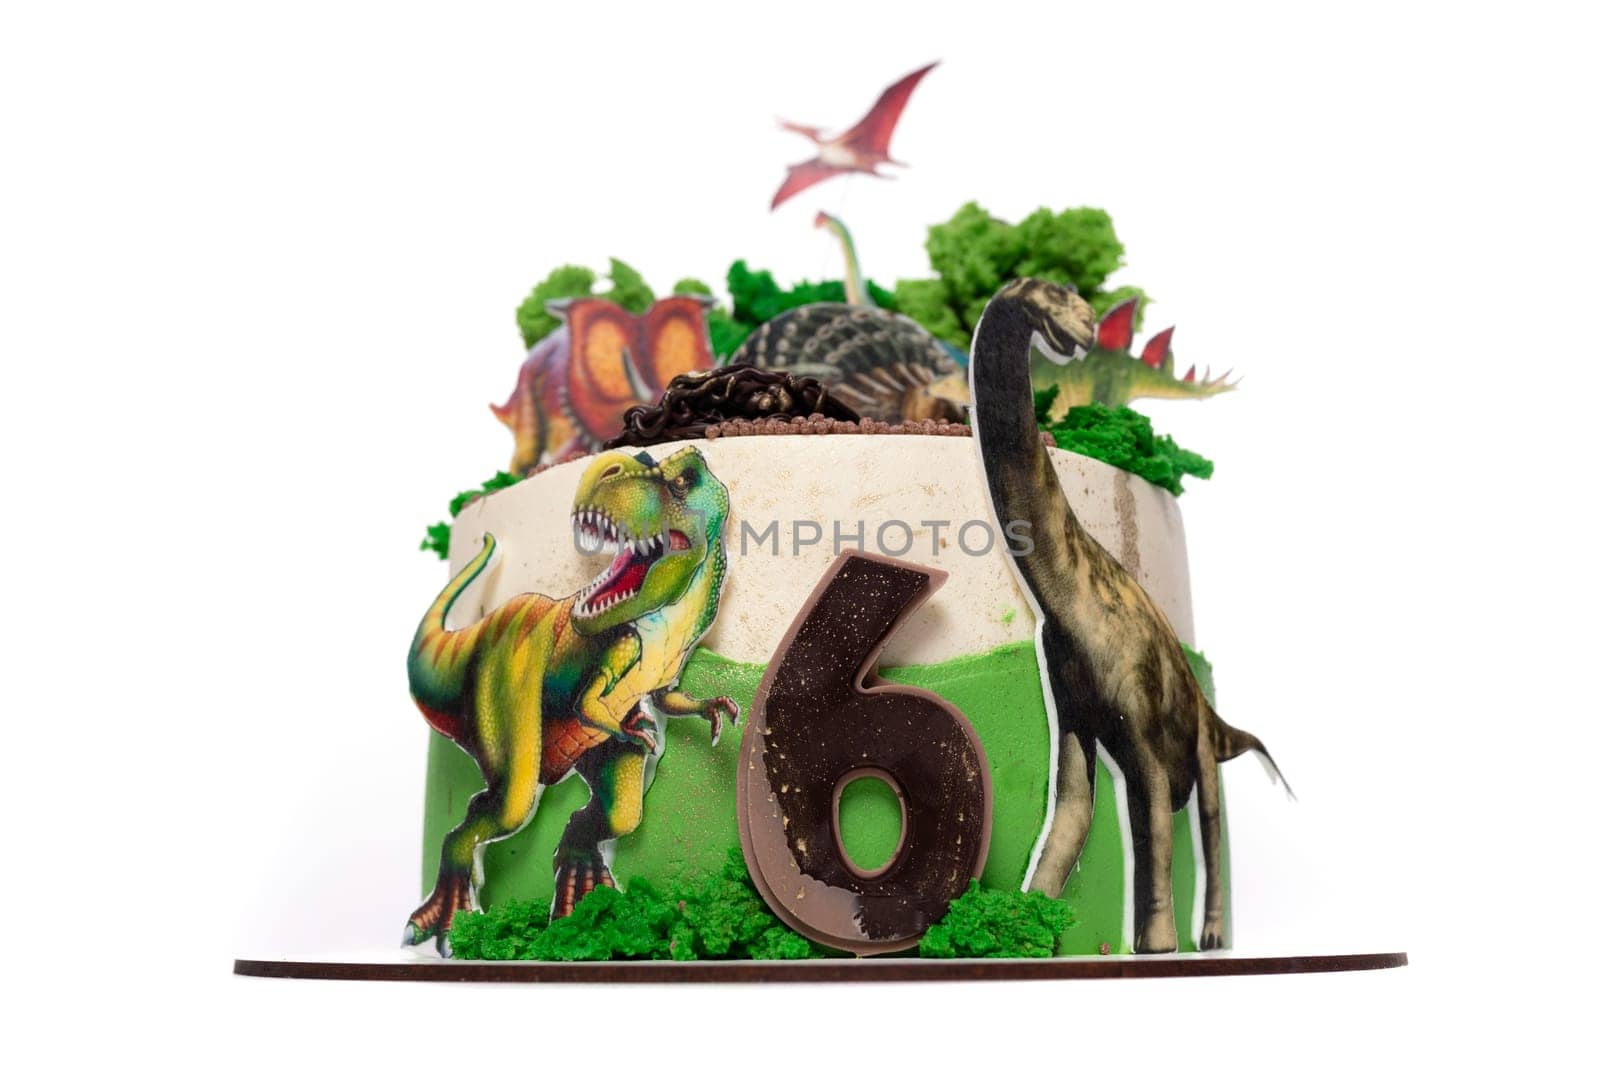 Dinosaur-Themed Birthday Cake With Number Six by TRMK